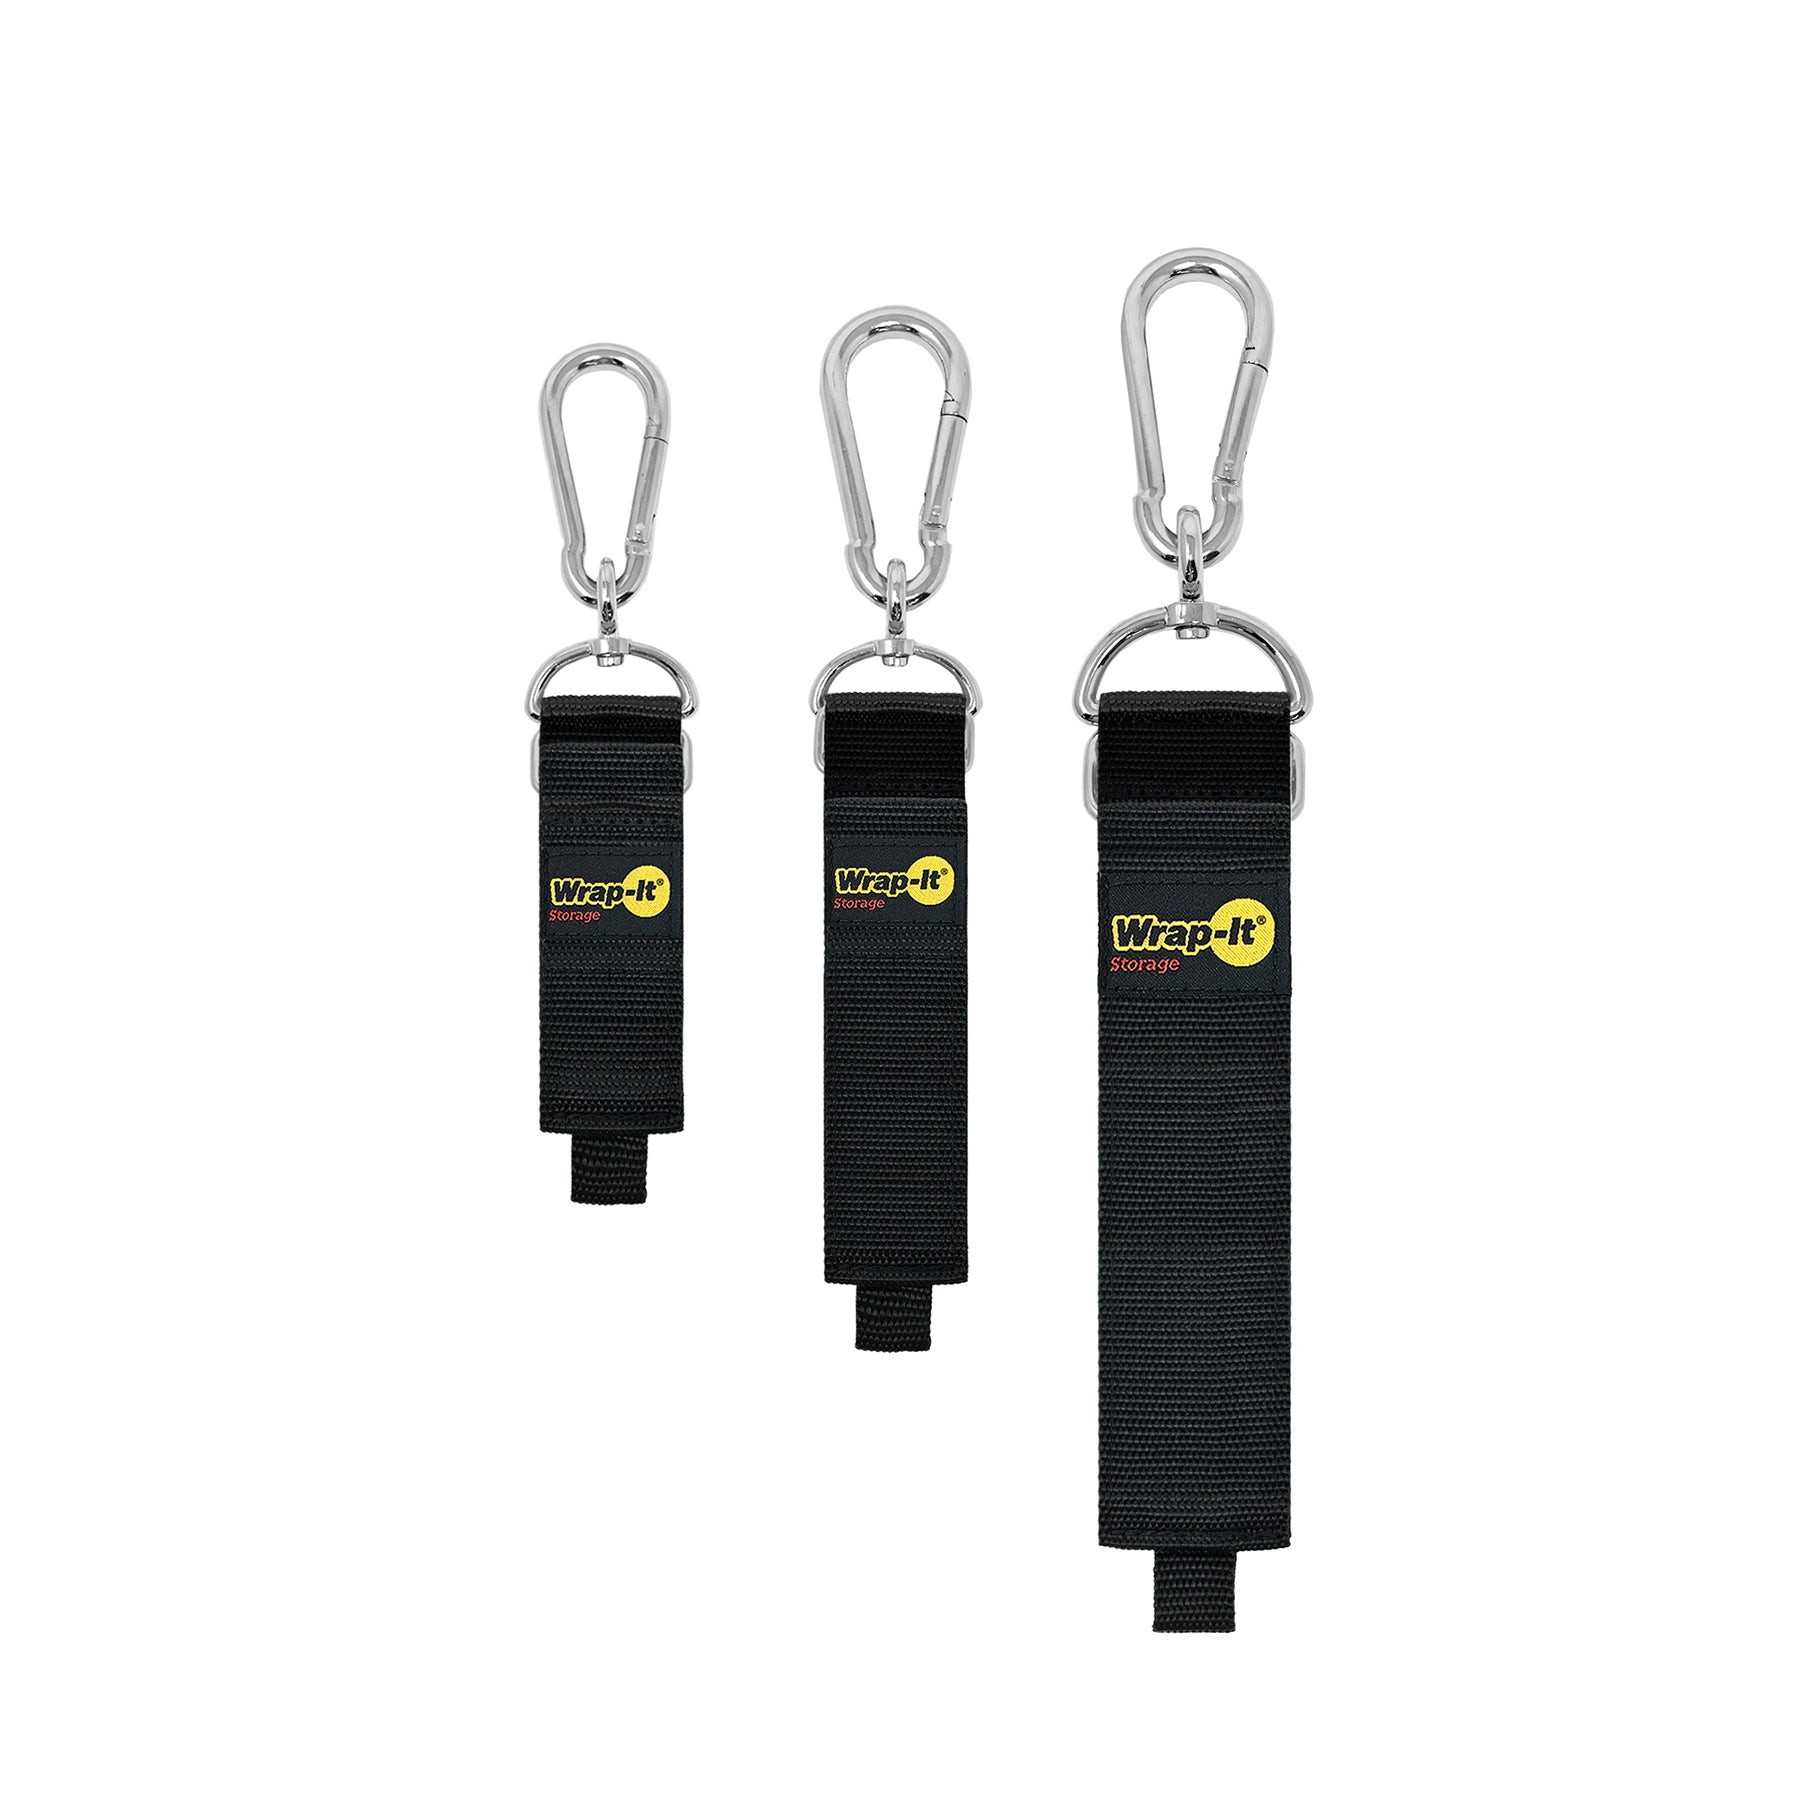 VELCRO® Brand EASY HANG™ Straps with Heavy Duty Carabiner